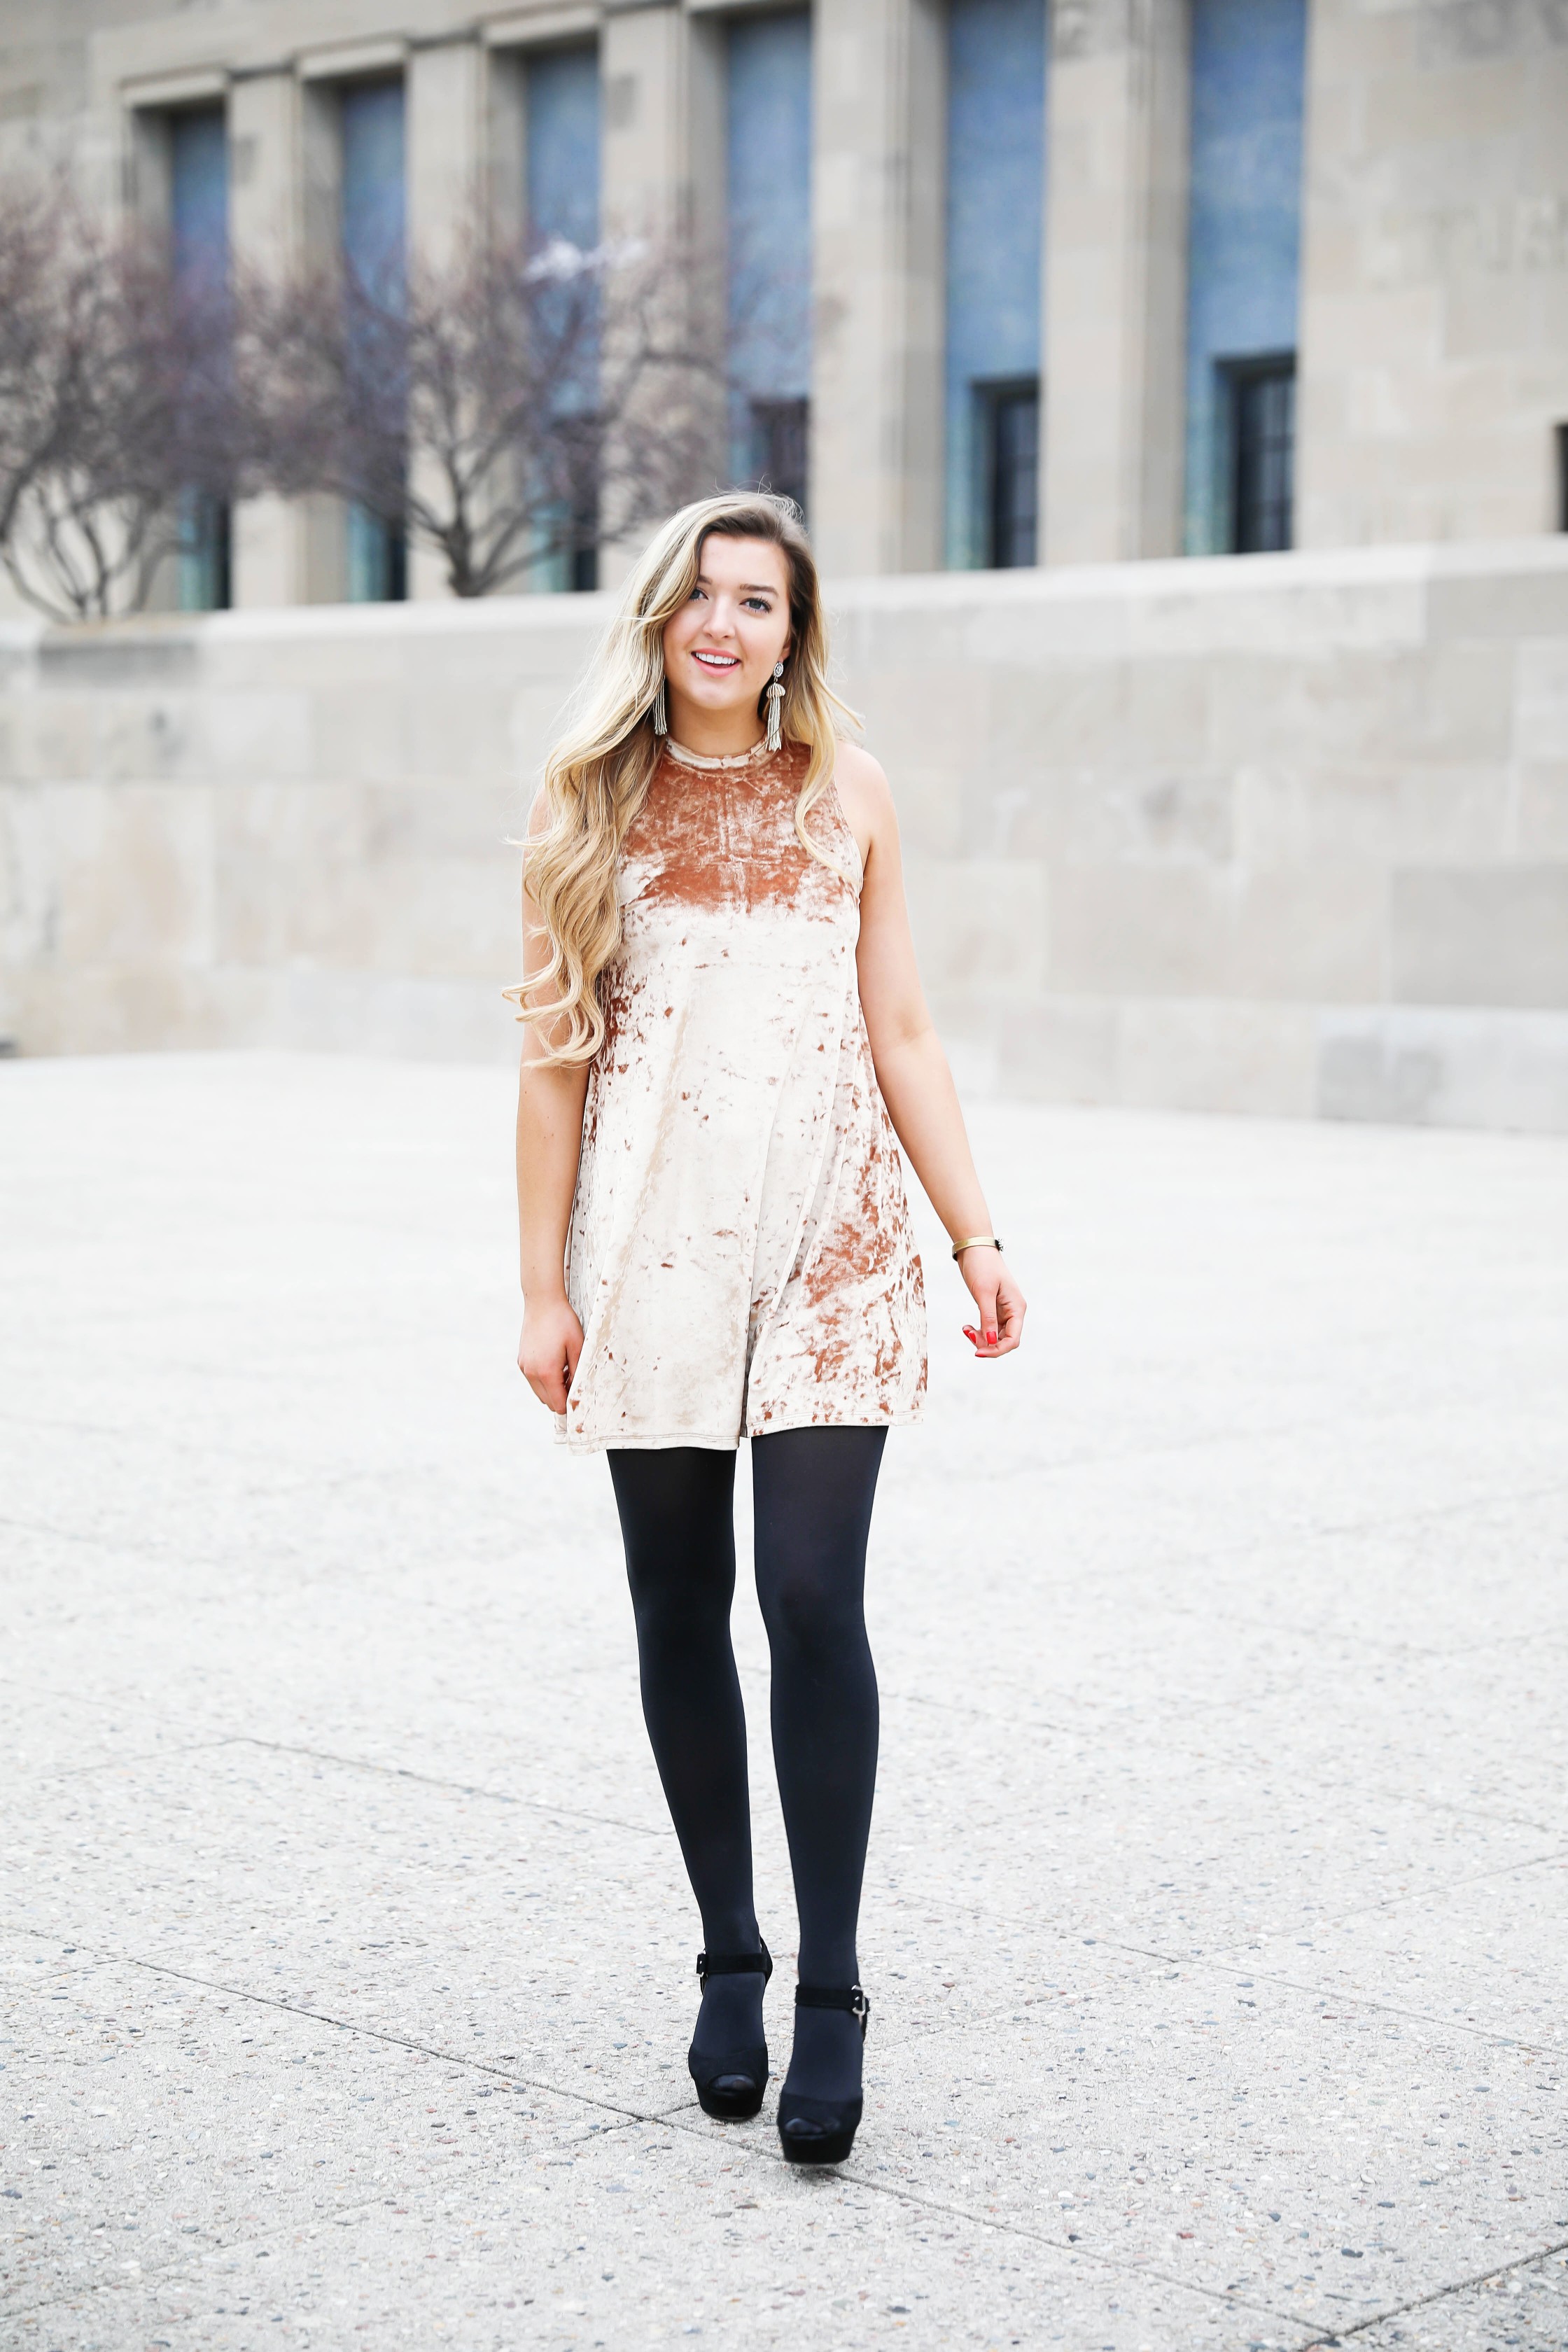 Velvet dress wtih black tights and black heels! The cutest new years eve outfit! Classy nye look! This dress holiday outfit is on the blog daily dose of charm by lauren lindmark! Click for details!